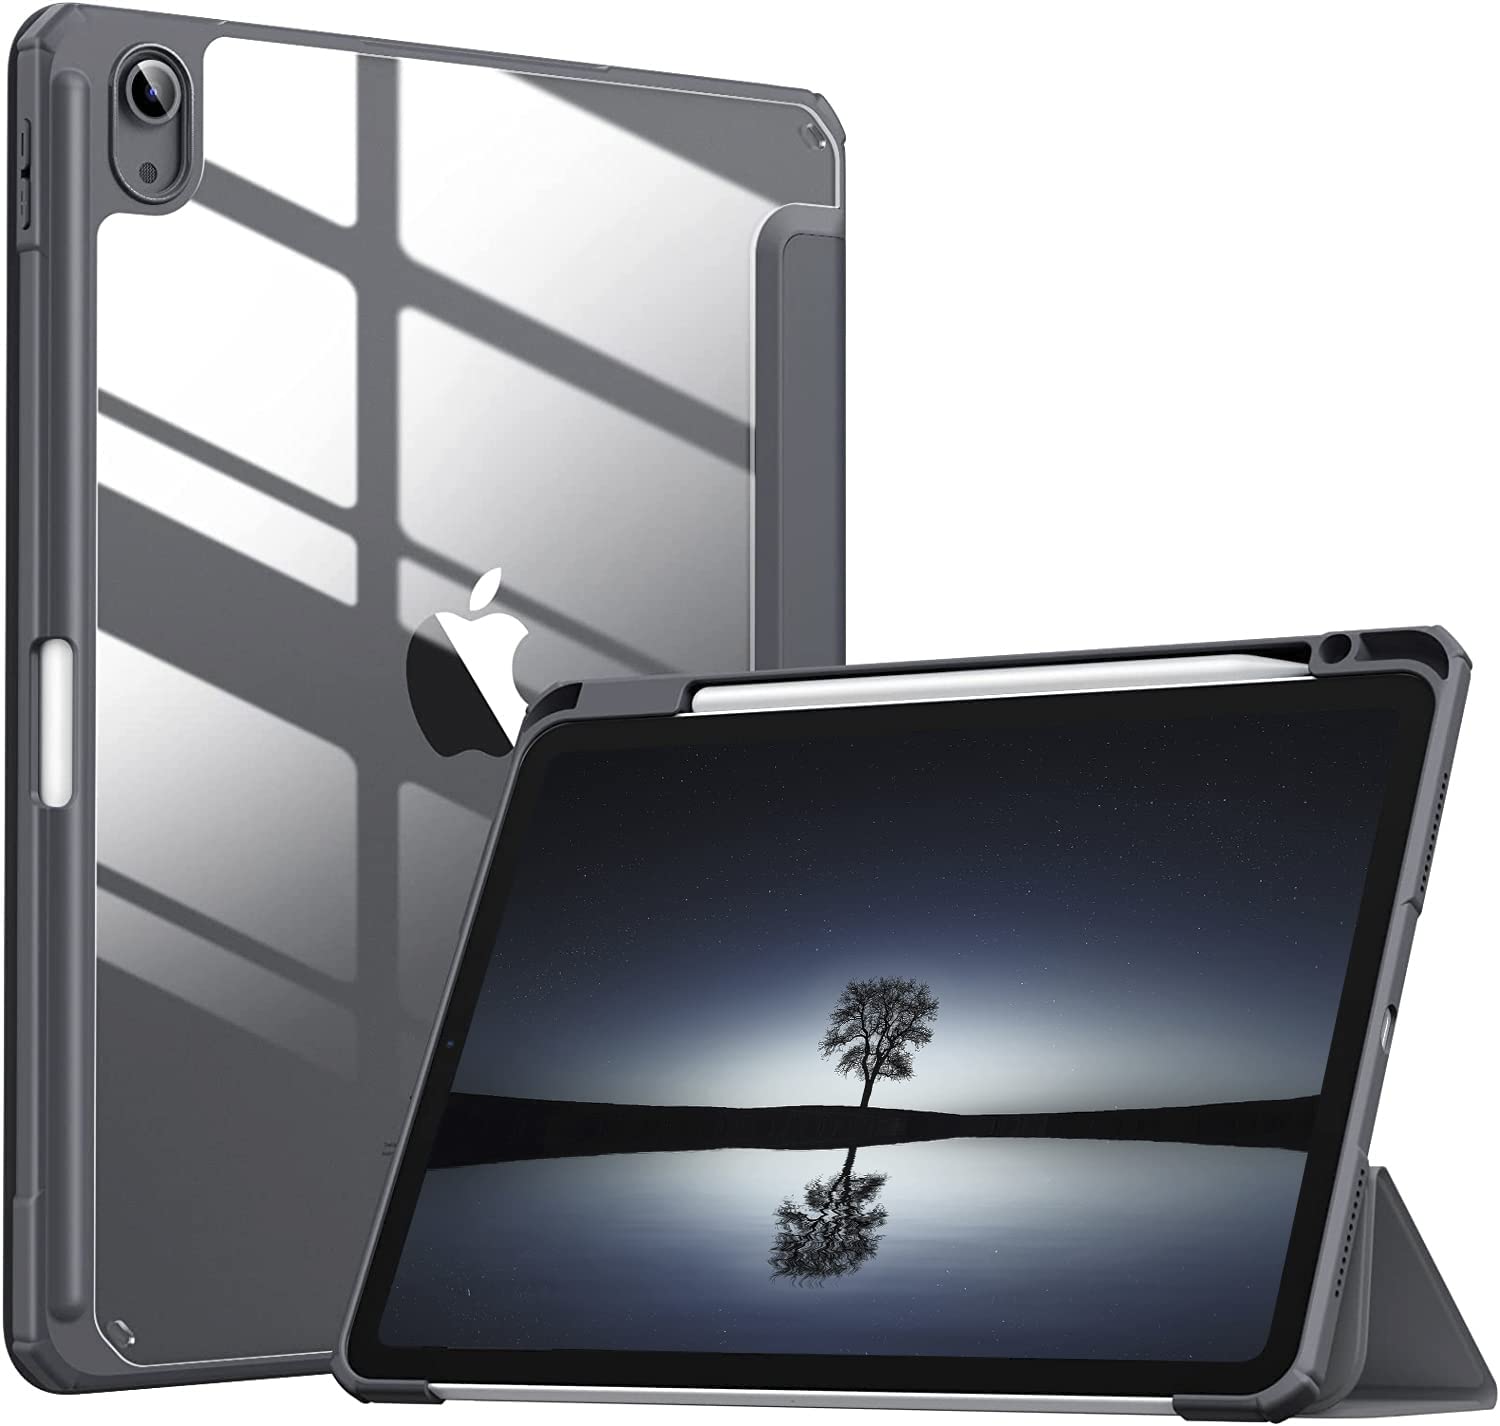 MoKo Case Fit iPad Air 5th/4th Generation 10.9 Inch 2022/2020 with Pencil Holder [Support 2nd Gen Pencil Charging & Touch ID] Space Gray $7 shipped Amazon Prime